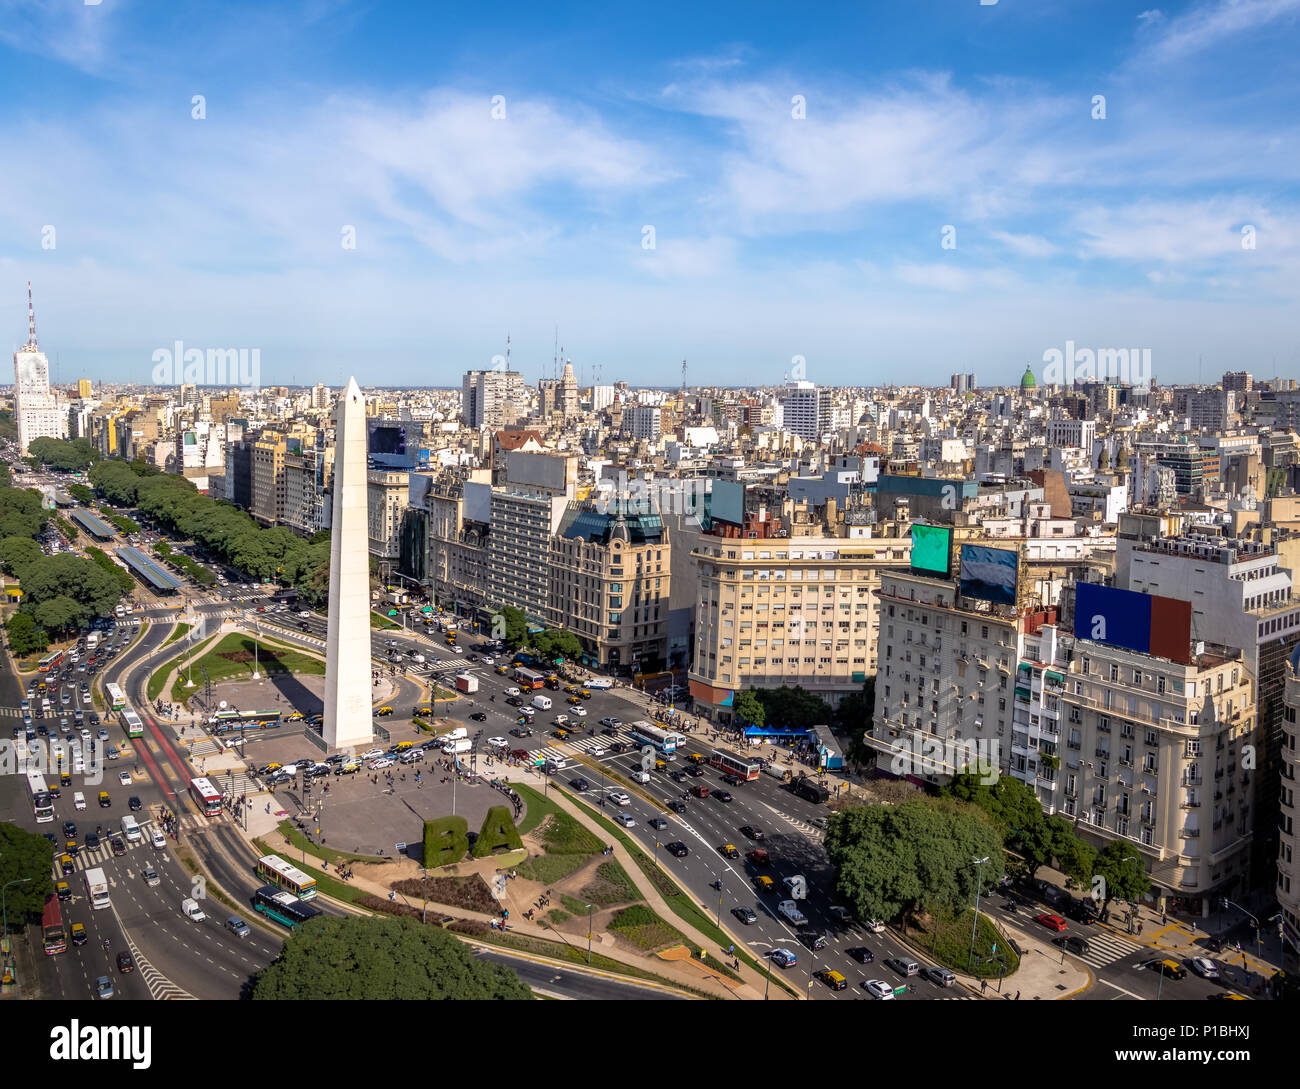 Aerial view of Buenos Aires city with Obelisk and 9 de julio avenue - Buenos Aires, Argentina Stock Photo